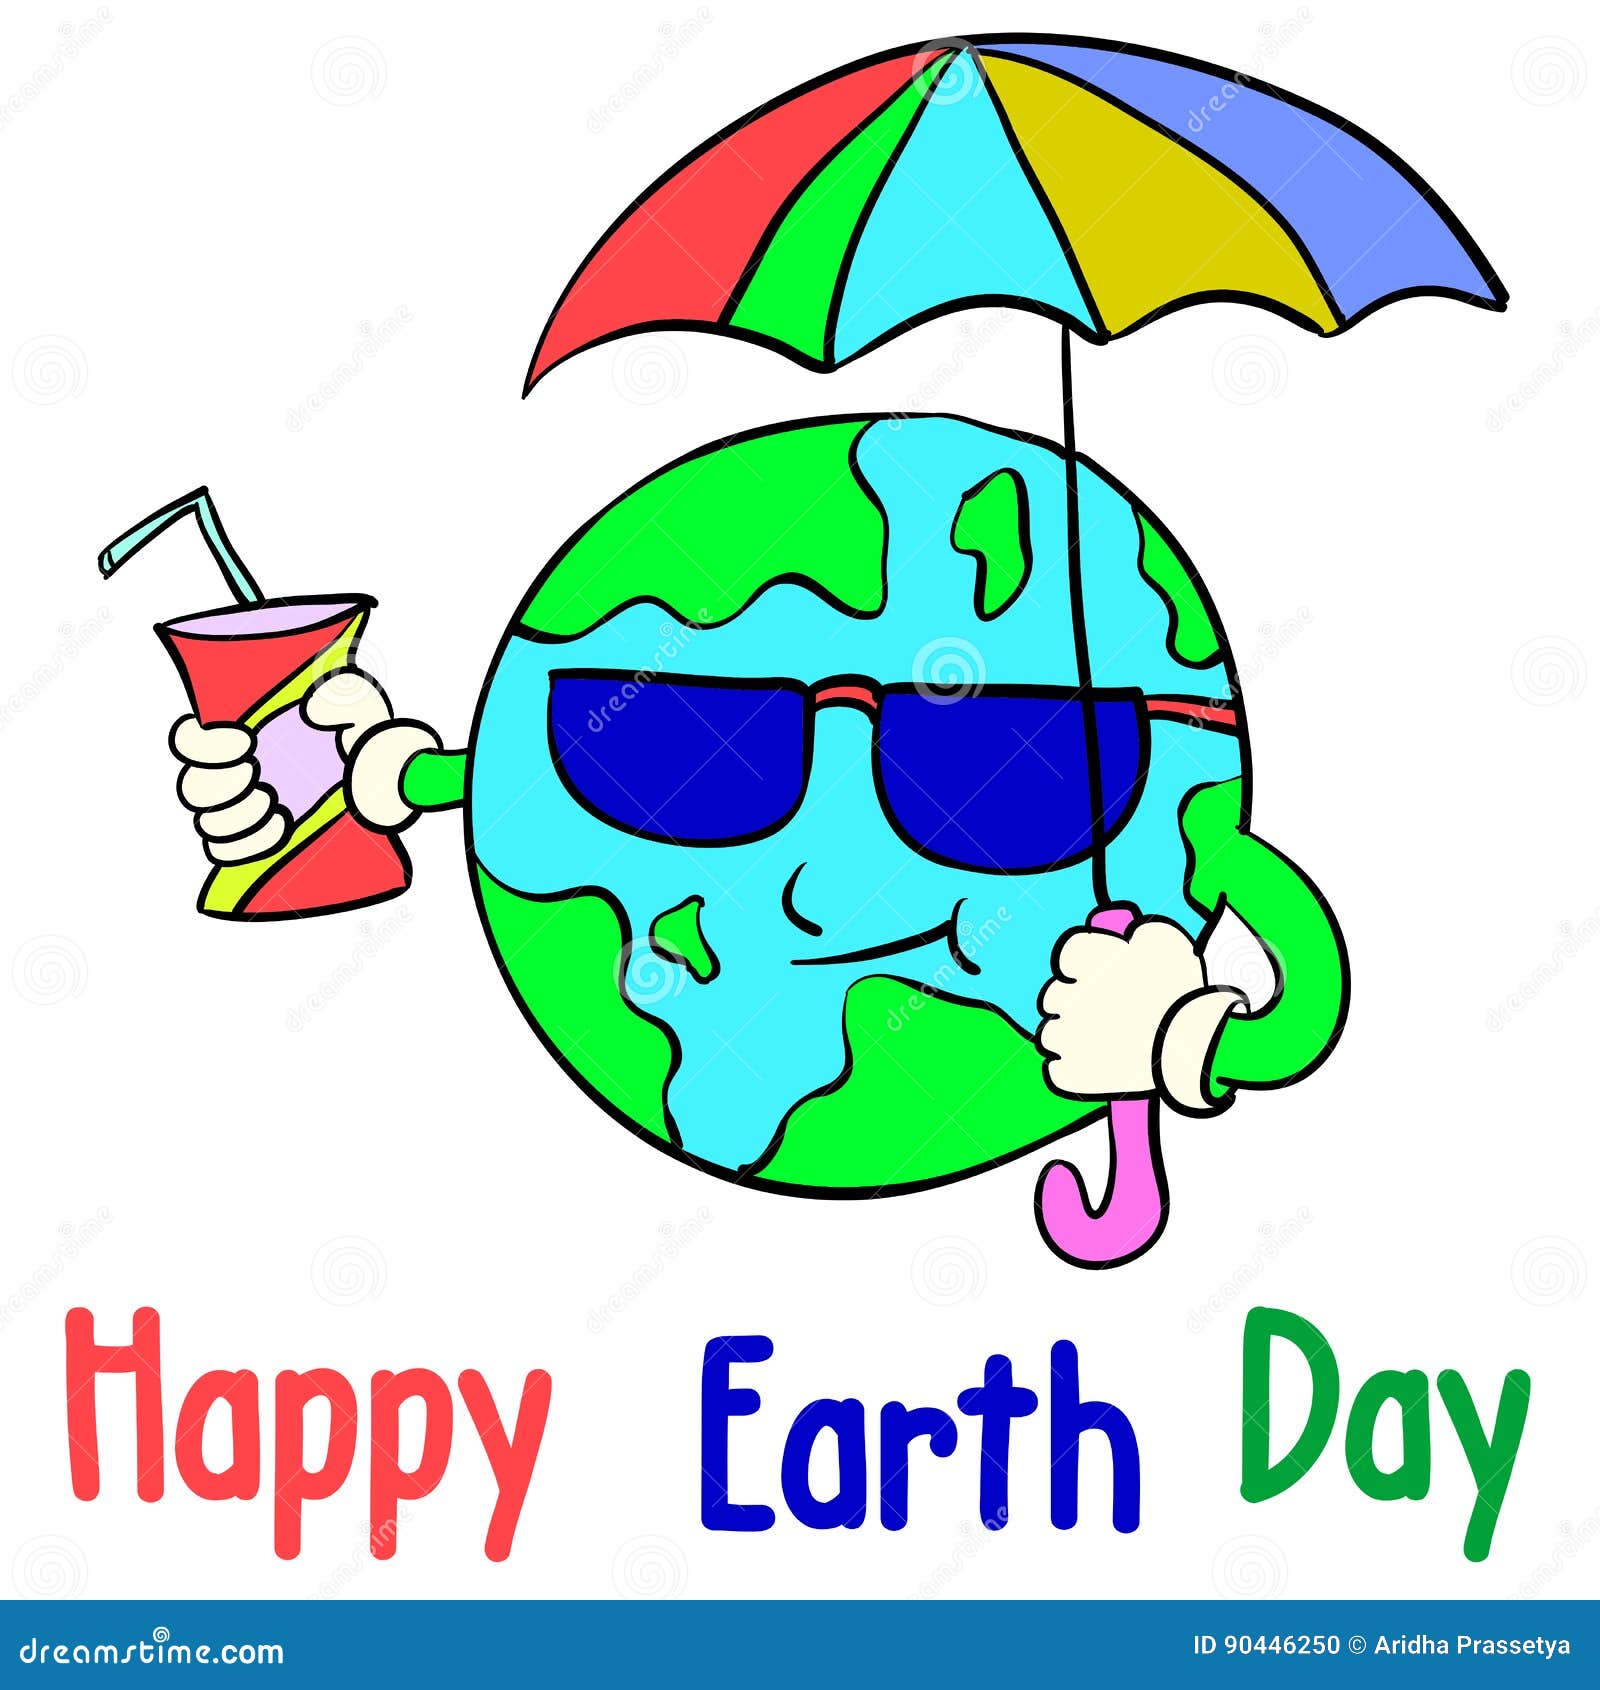 Cartoon Earth Day Style Collection Stock Vector - Illustration of drawing,  happy: 90446250